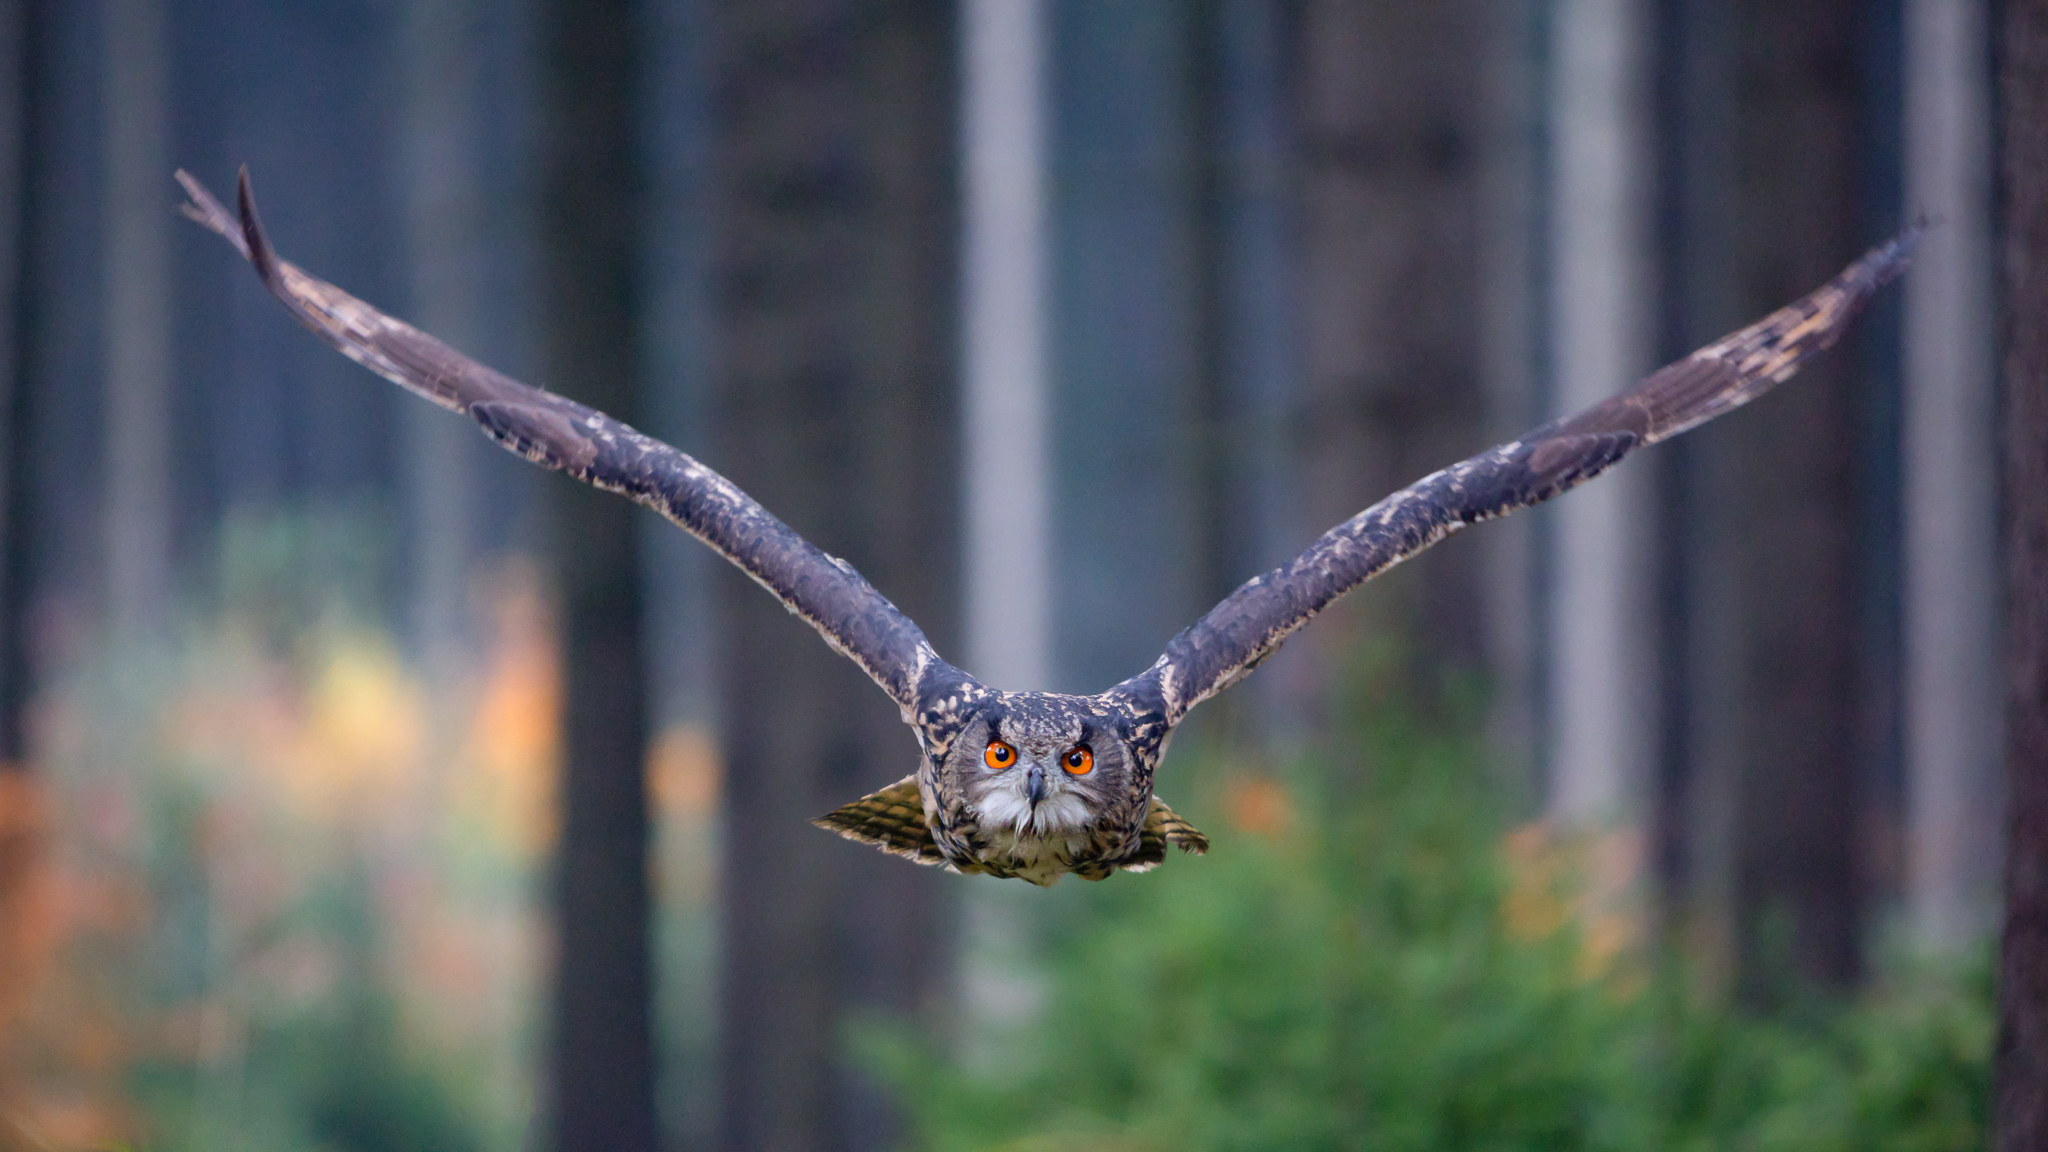 Once again, eye contact with an owl. This time with an Eagle Owl and as an "action shot".